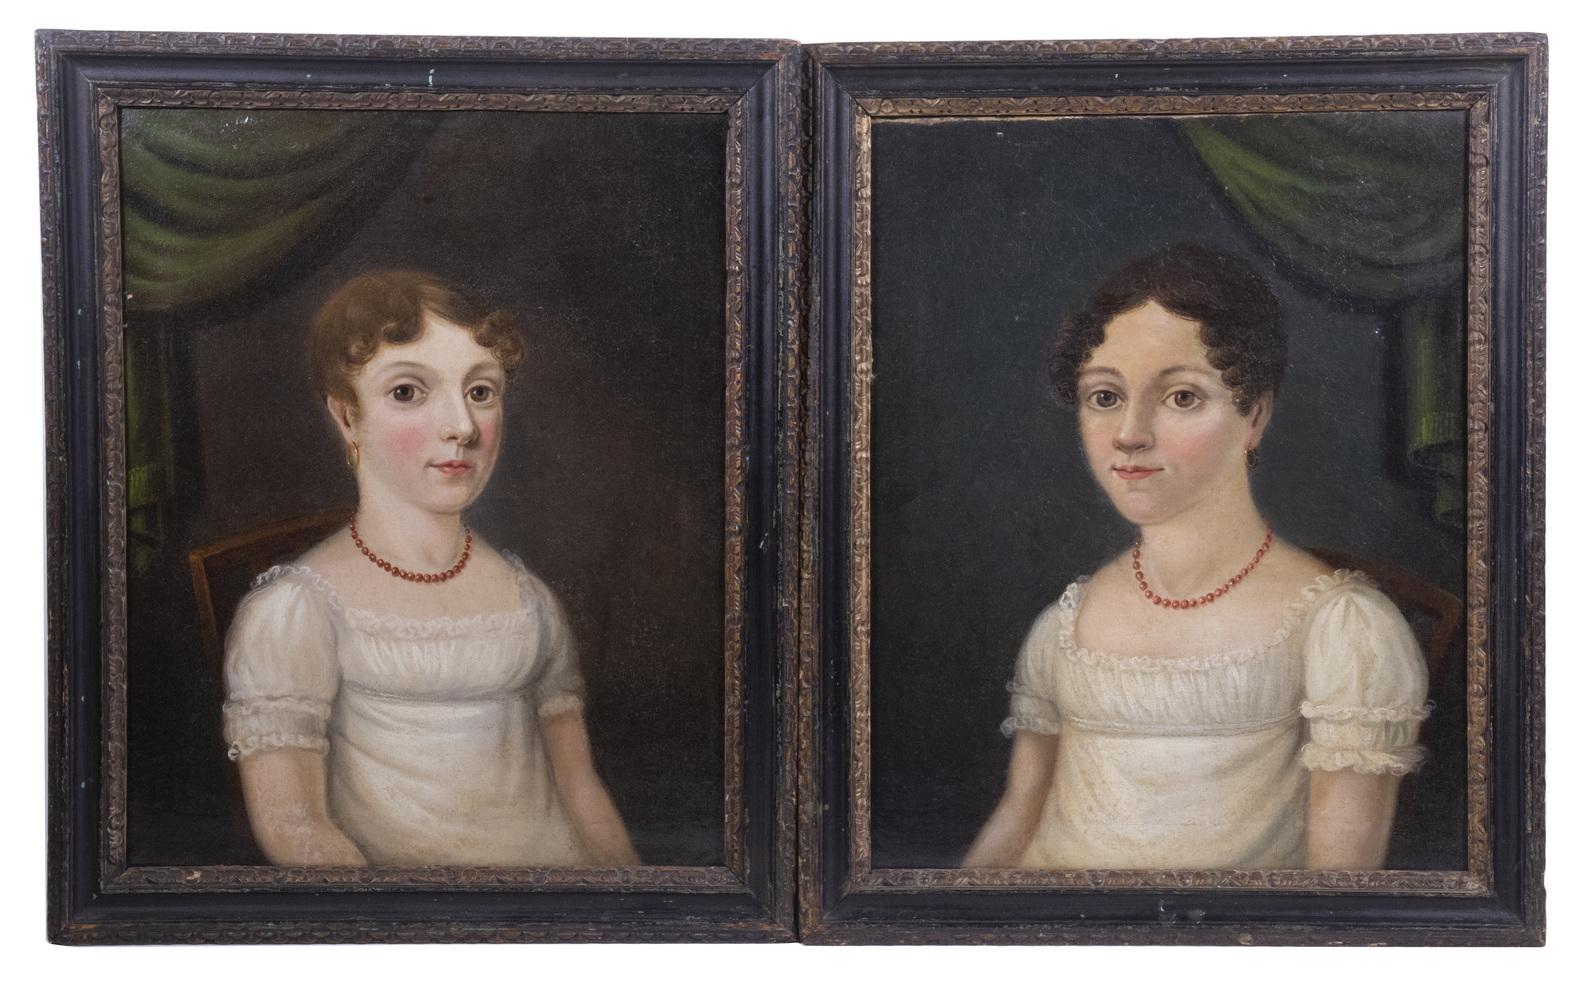 A RARE PAIR OF PORTRAIT PAINTINGS OF